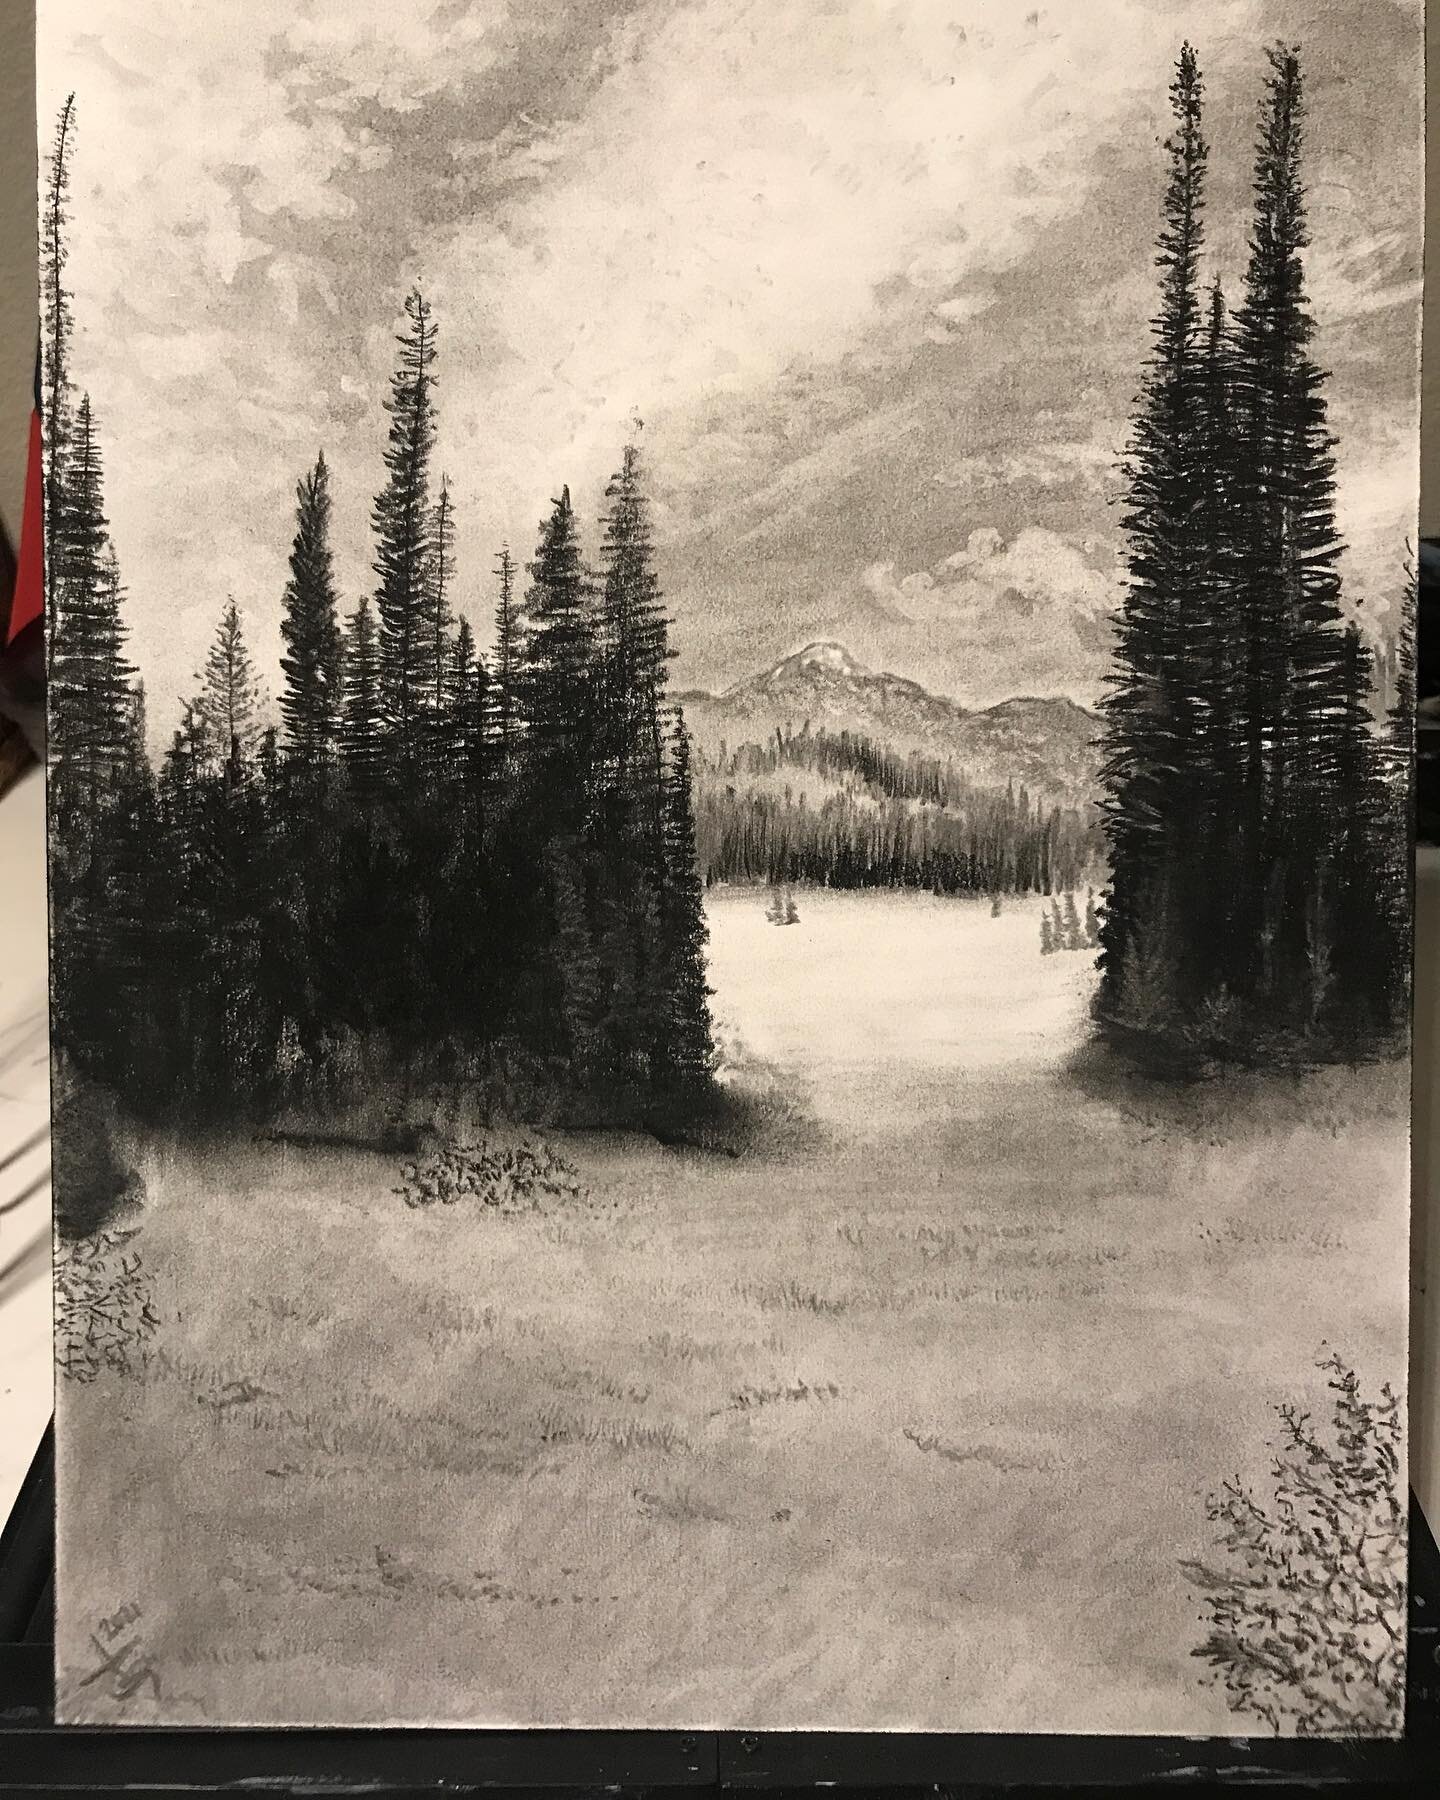 after this long week in texas, finally found motivation..
*
*
*
#charcoalart #charcoaldrawing #landscapeart #drawingsofinstagram #blackandwhiteart